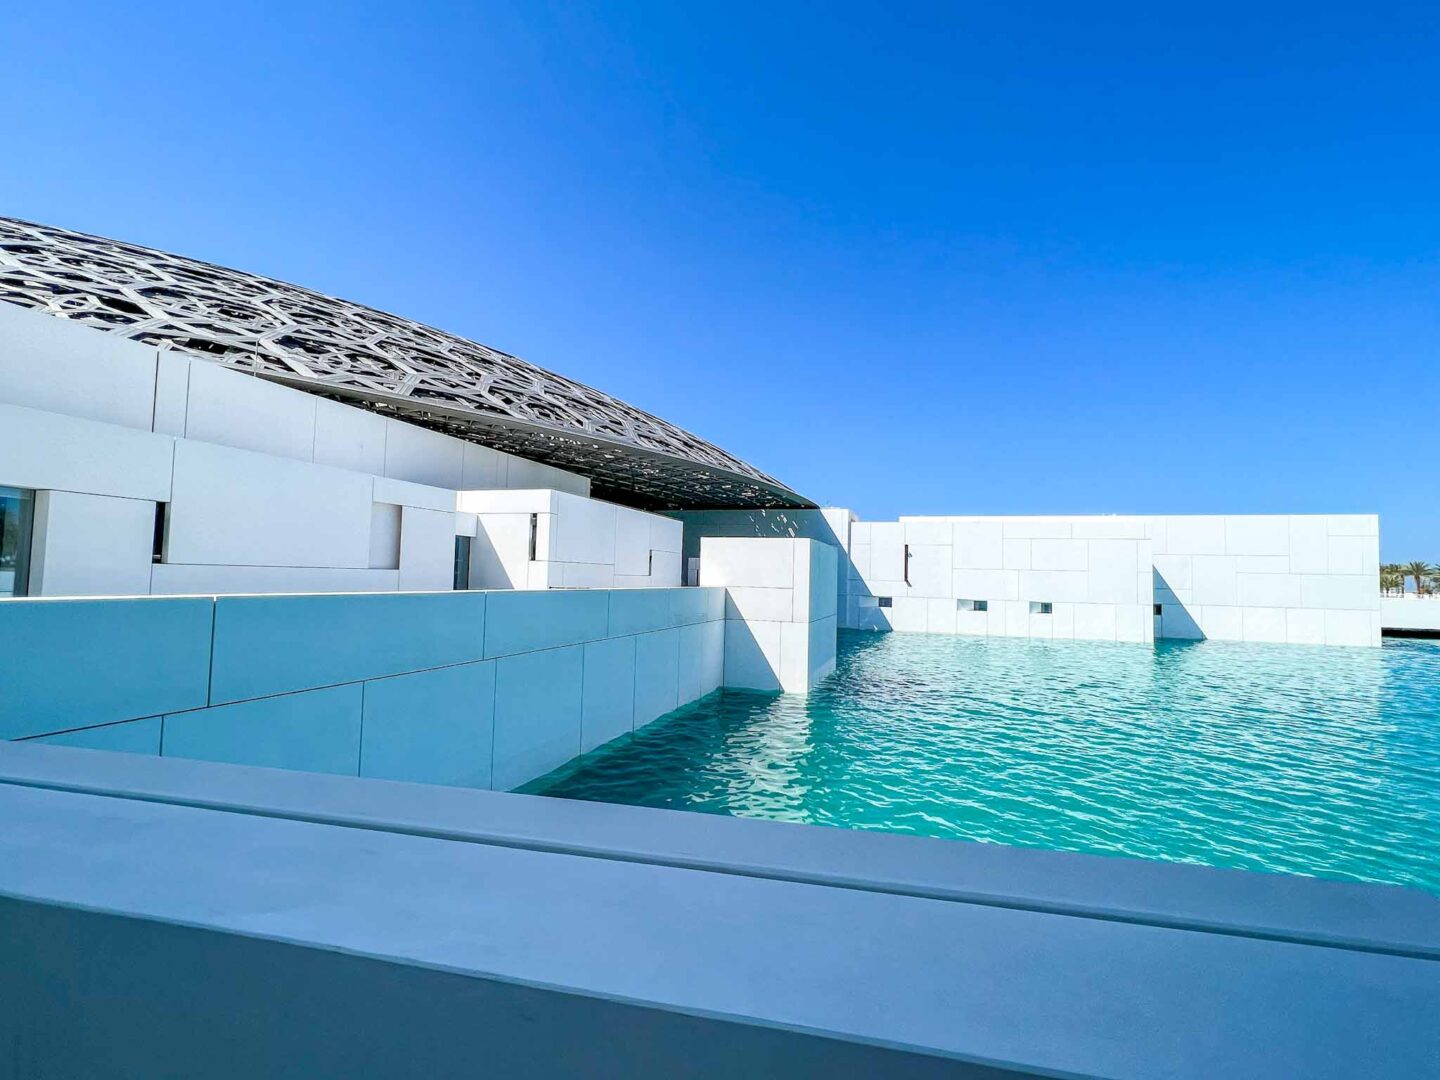 Things to do in Abu Dhabi, The Louvre from outside with blue water